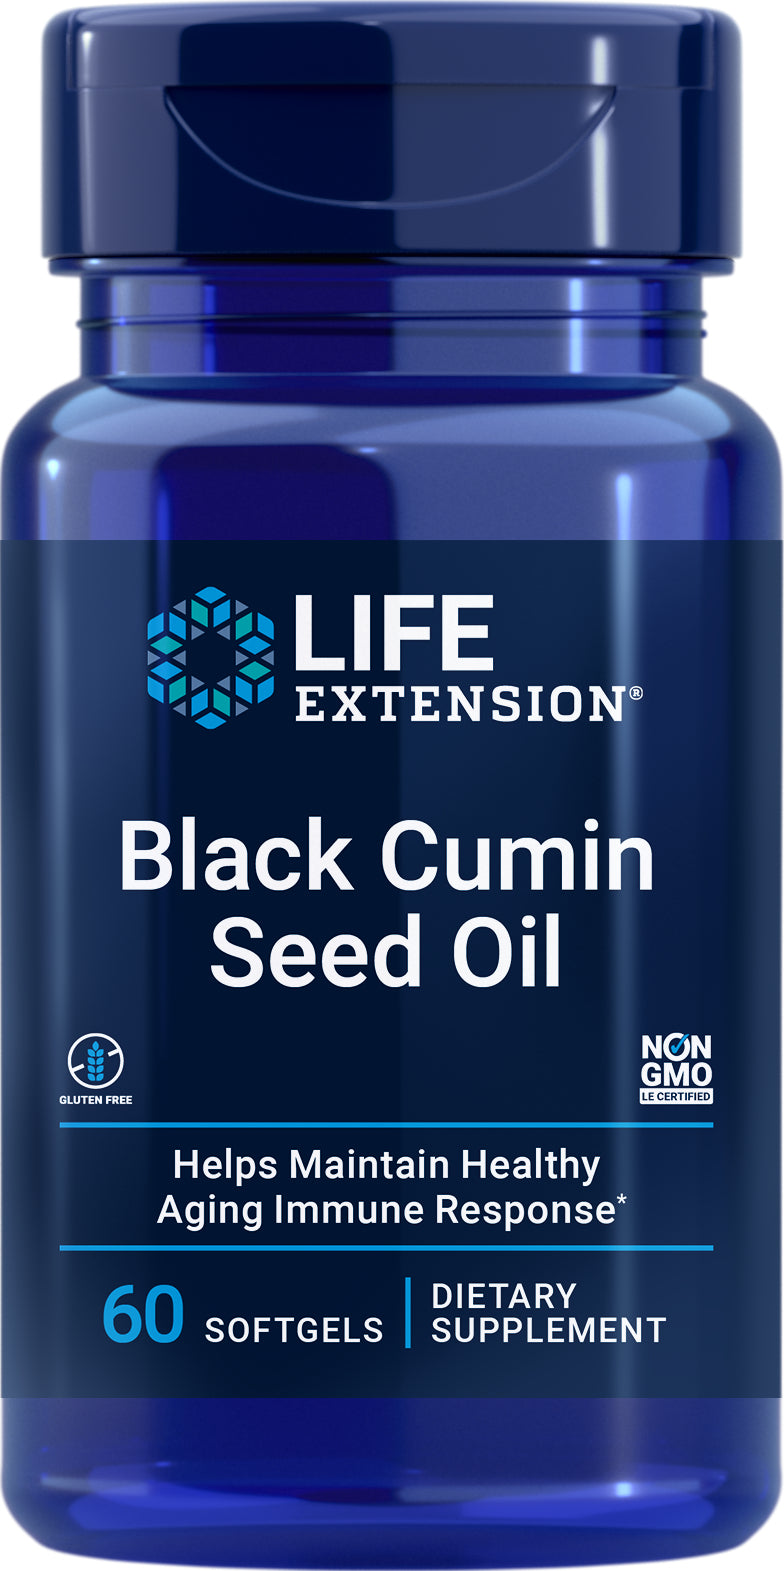 Black Cumin Seed Oil 60 softgels by Life Extension